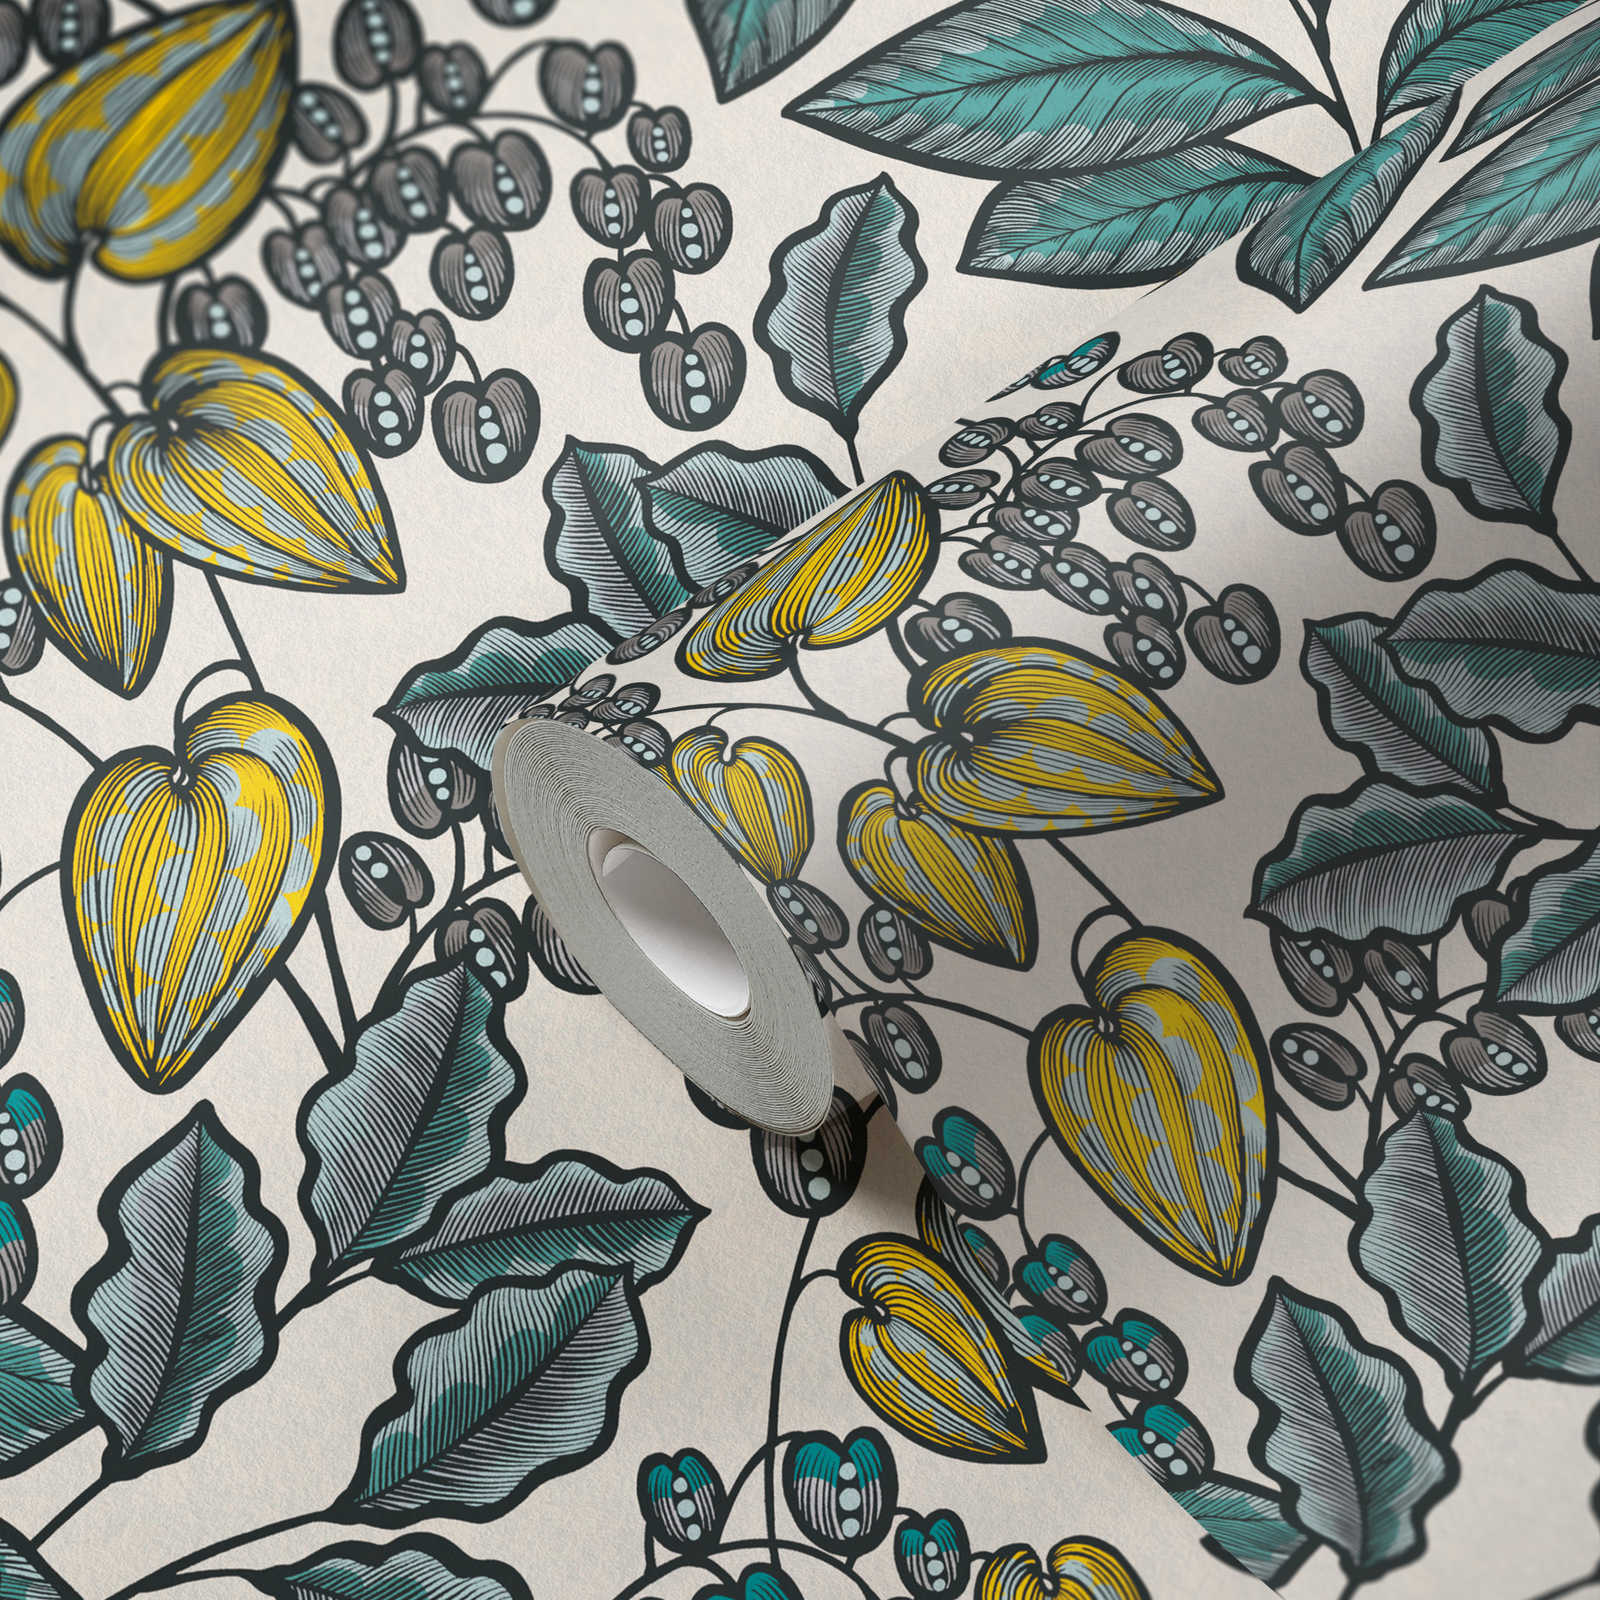             Non-woven wallpaper leaves design in Scandi look - blue, white, yellow
        